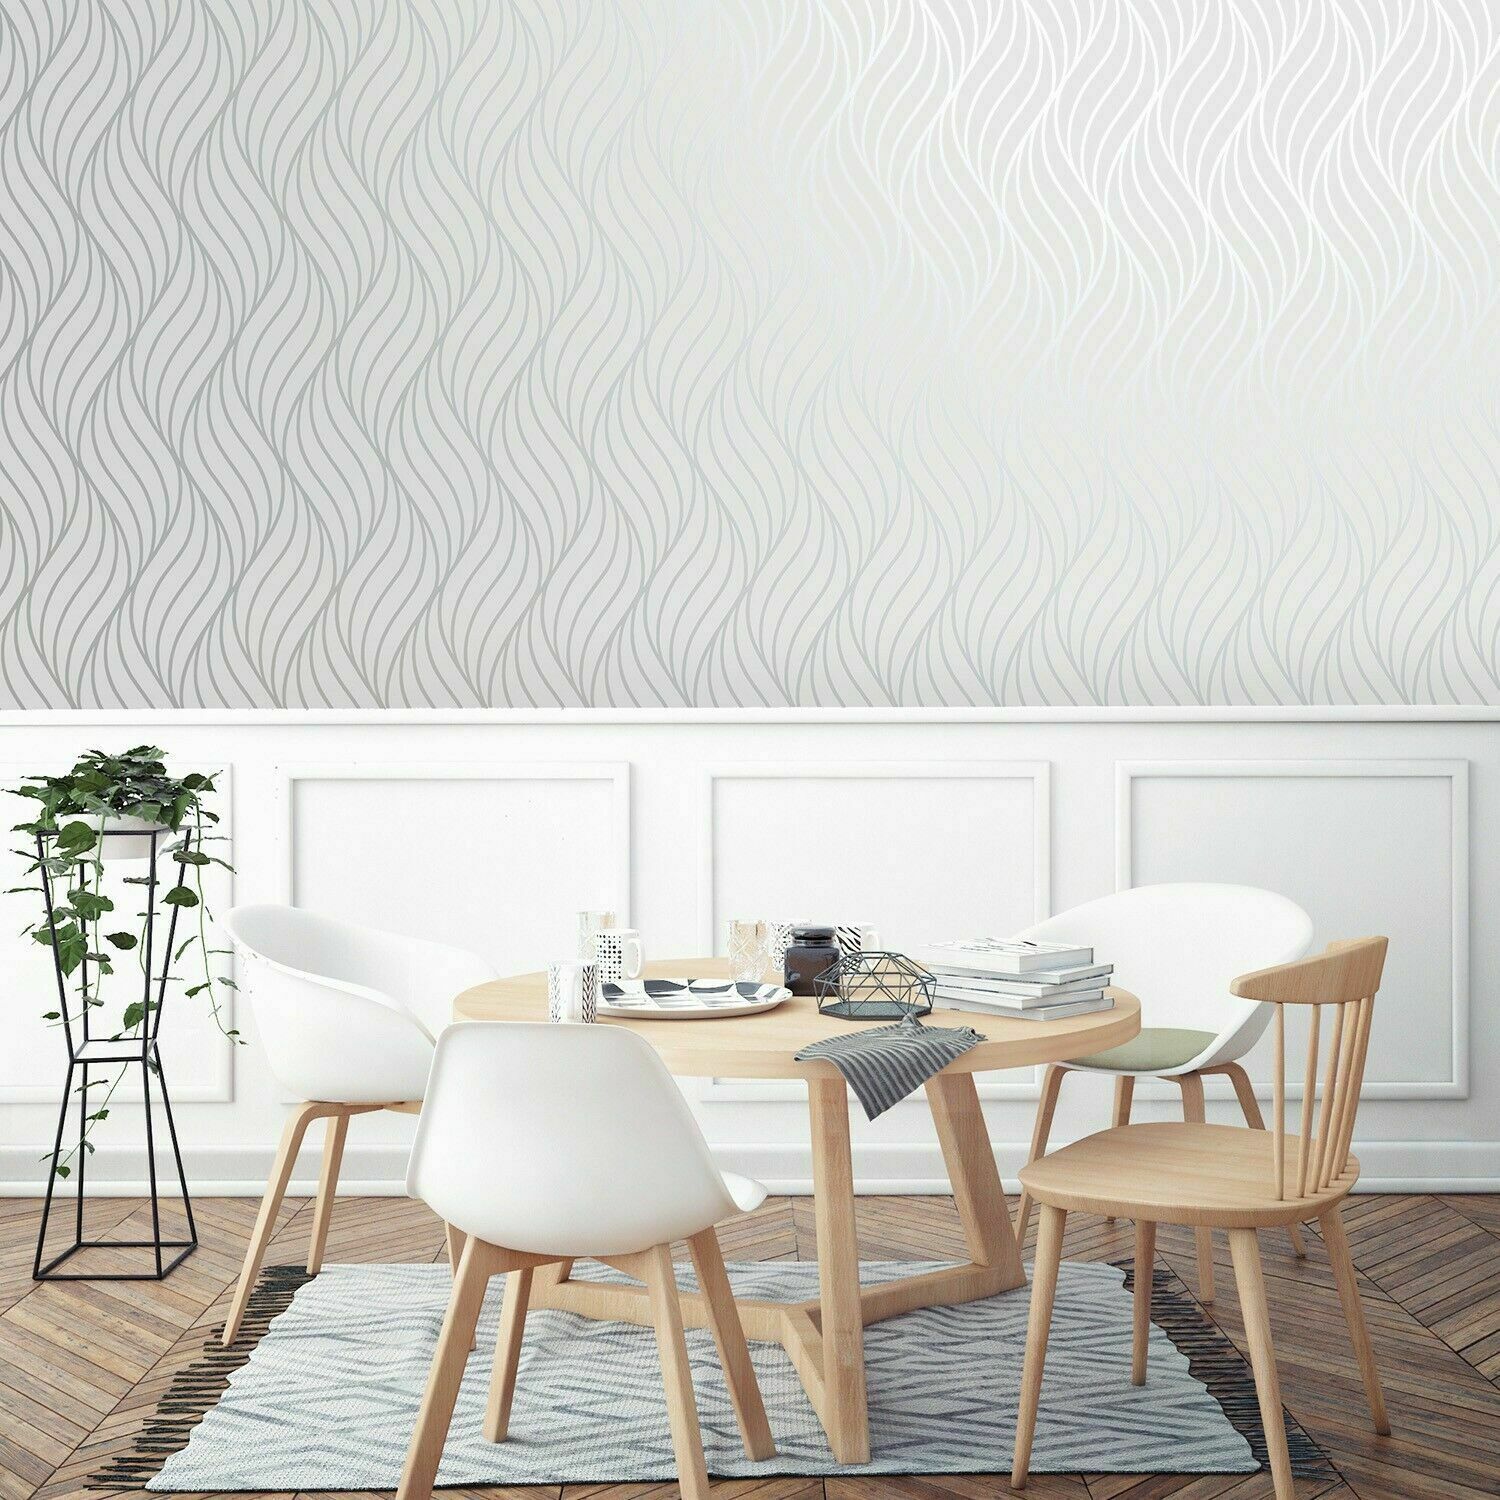 With a matt white background and a contrasting, high-shine wave design in metallic silver, the Alderney Grey/Silver Wallpaper is a stunning choice for opening up smaller rooms, creating a sense of space and light.